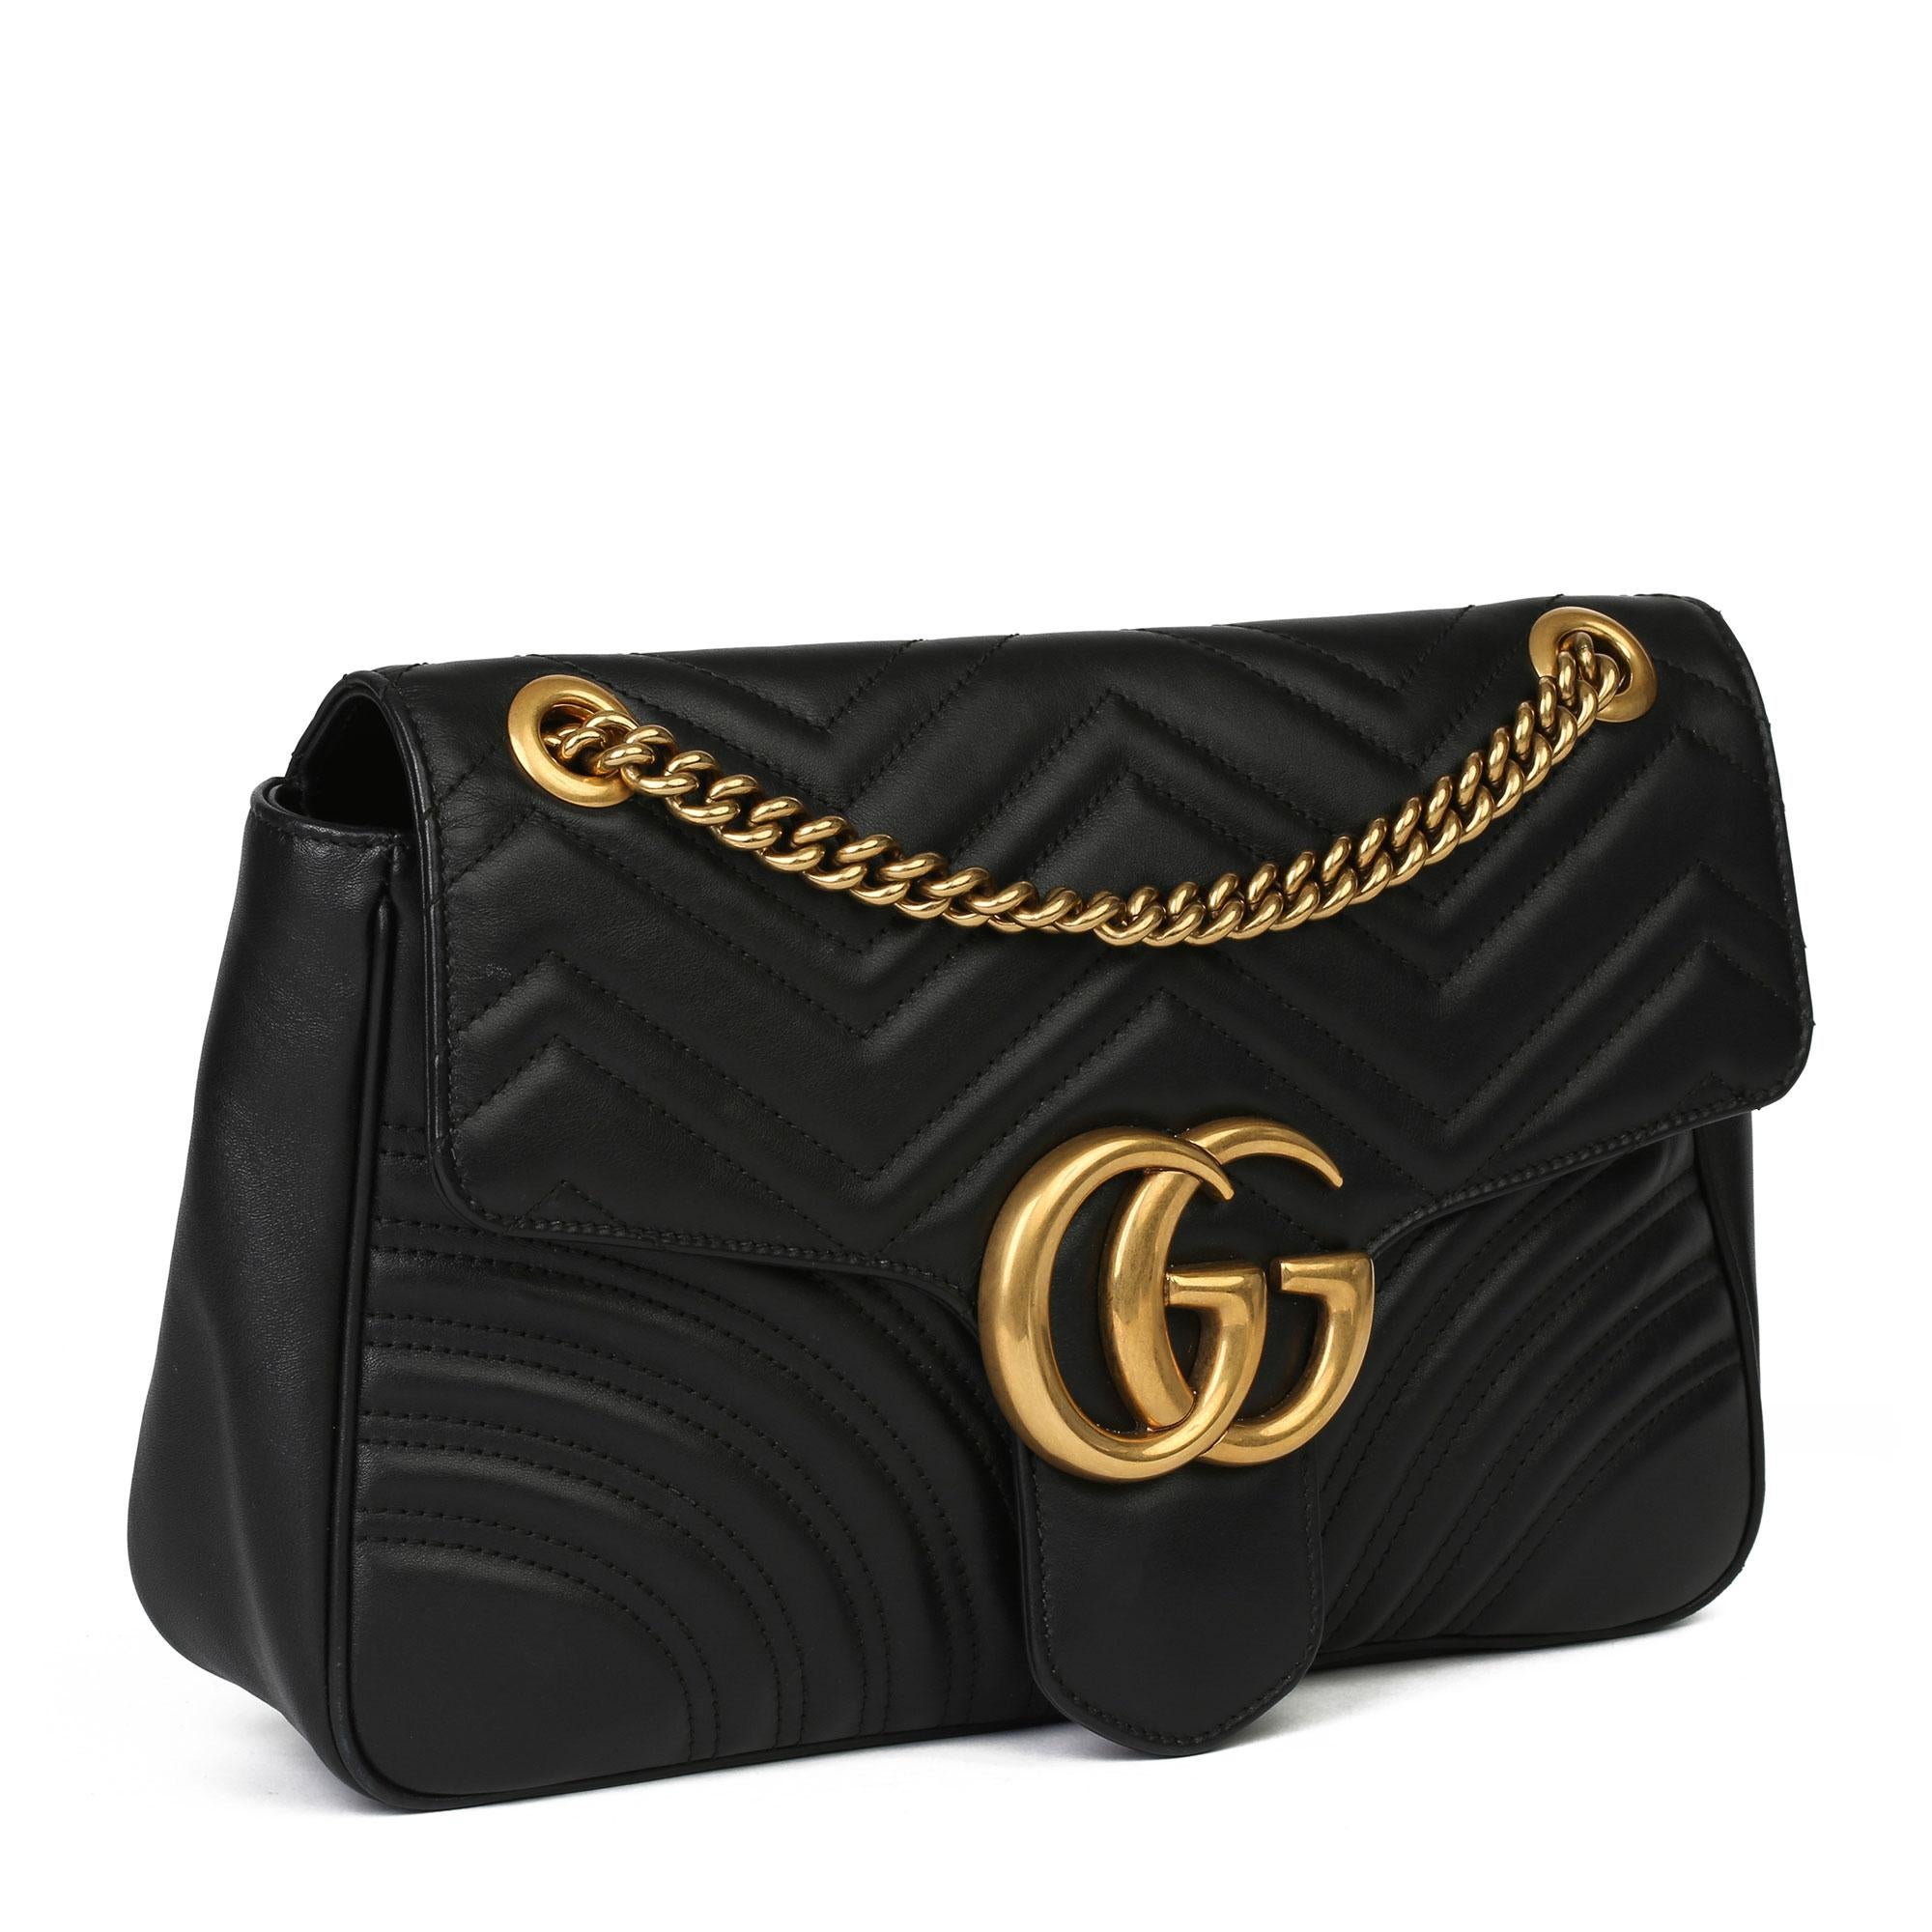 GUCCI
Black Quilted Chevron Lambskin Leather Medium Marmont 

Xupes Reference: CB310
Serial Number:  443496 213317
Age (Circa): 2018
Accompanied By: Gucci Dust Bag 
Authenticity Details: Date Stamp (Made in Italy) 
Gender: Ladies
Type: Shoulder,